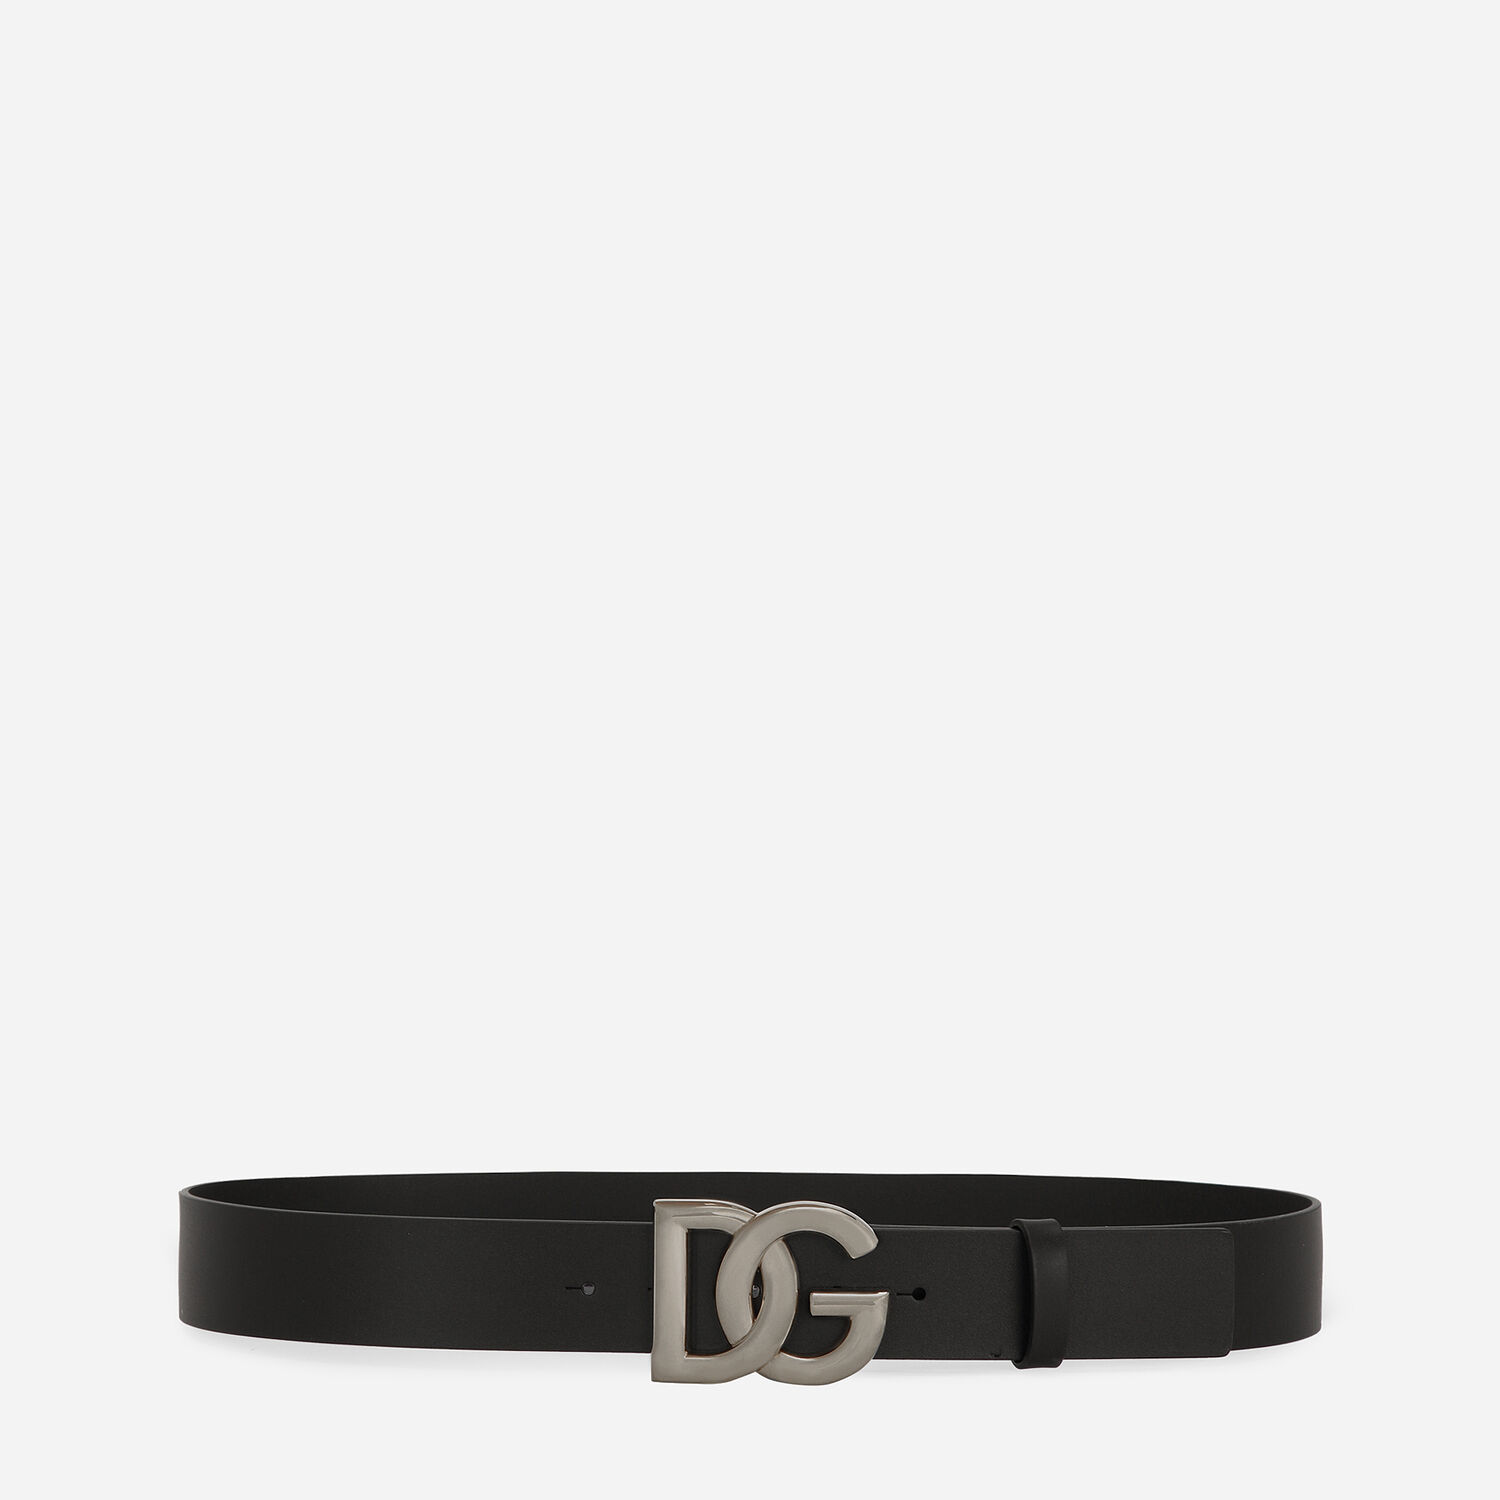 Lux leather belt with in buckle crossover Black for DG Dolce&Gabbana® US logo 